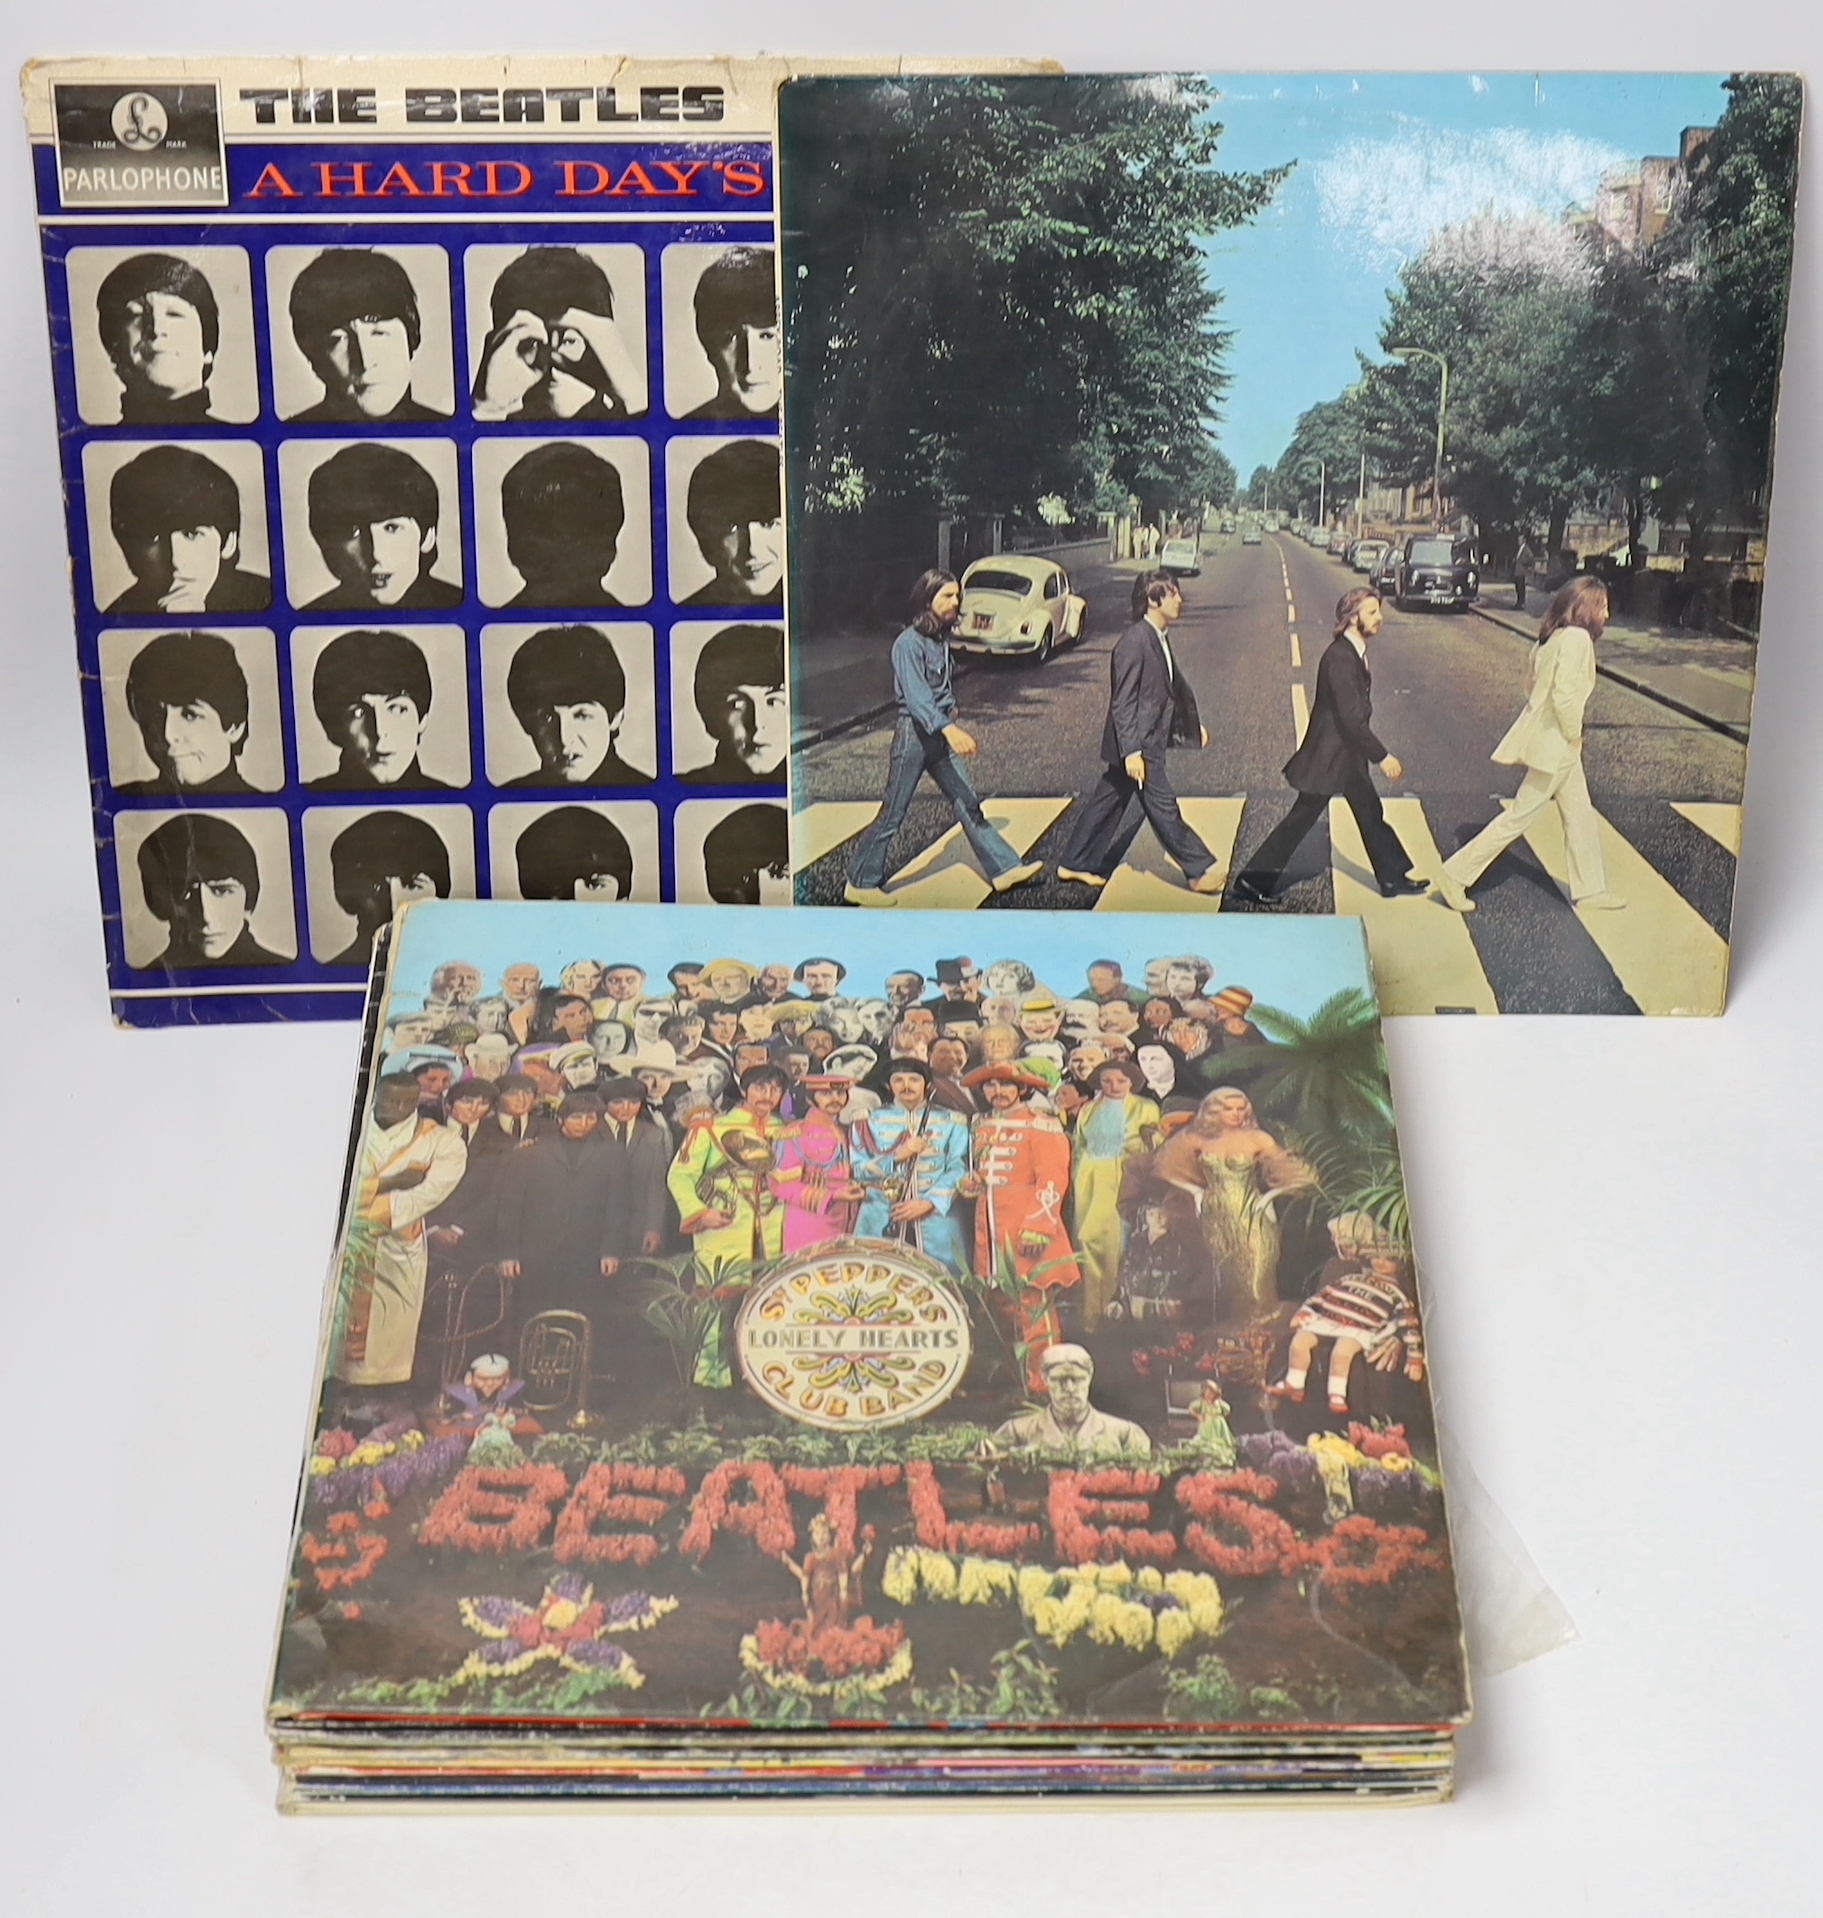 Fifteen The Beatles related albums, including, the White Album; No.0331437 (with three photo cards present), Abbey Road, Let It Be, Sgt. Pepper, and another, together with John Lennon, including Double Fantasy, Rock ‘n’